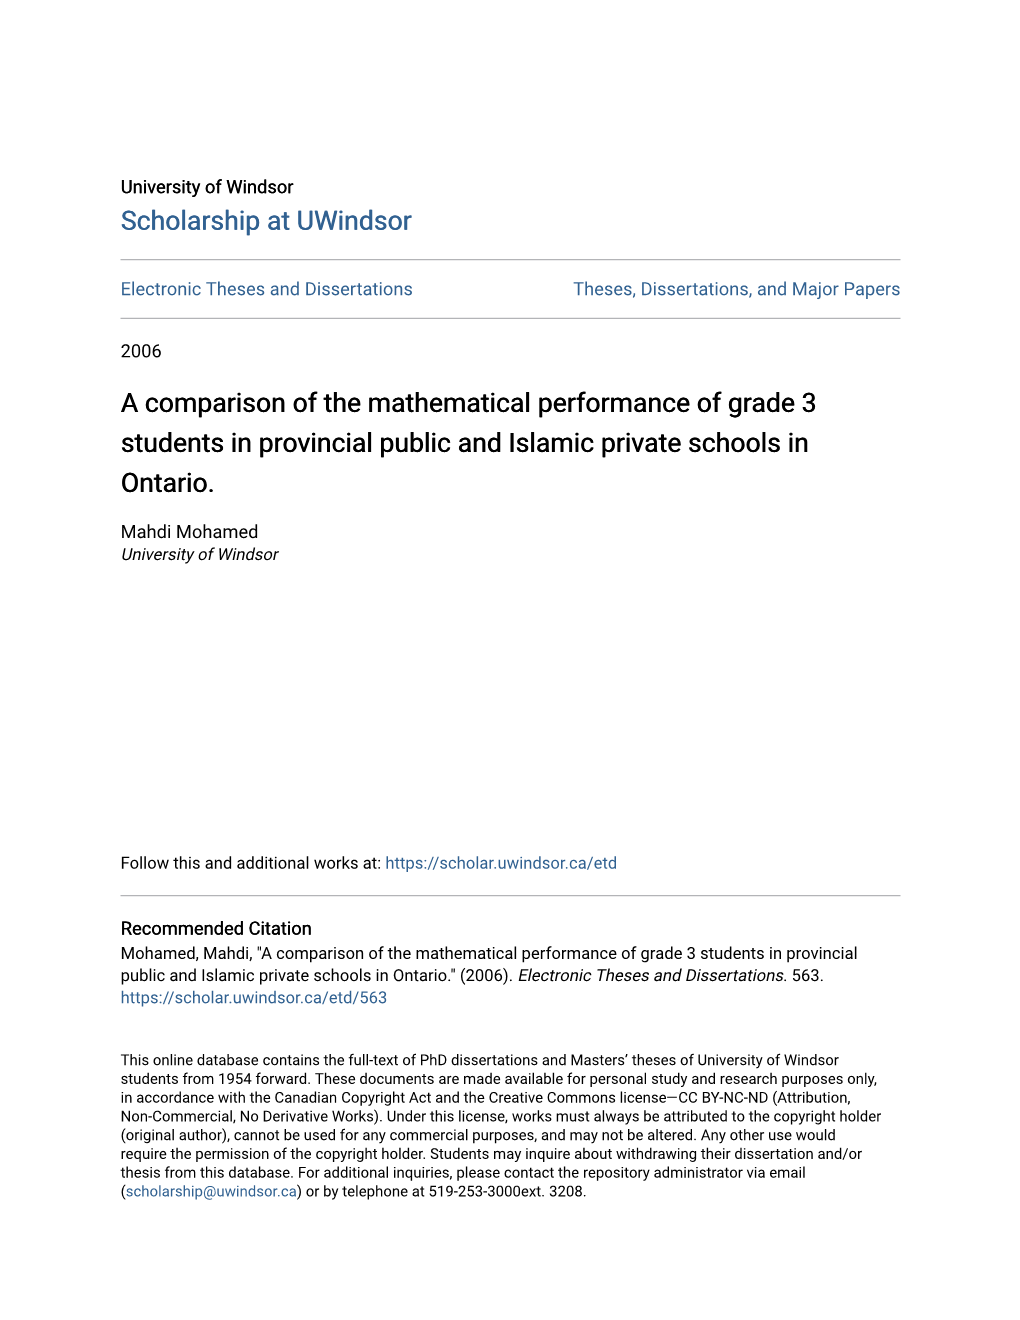 A Comparison of the Mathematical Performance of Grade 3 Students in Provincial Public and Islamic Private Schools in Ontario